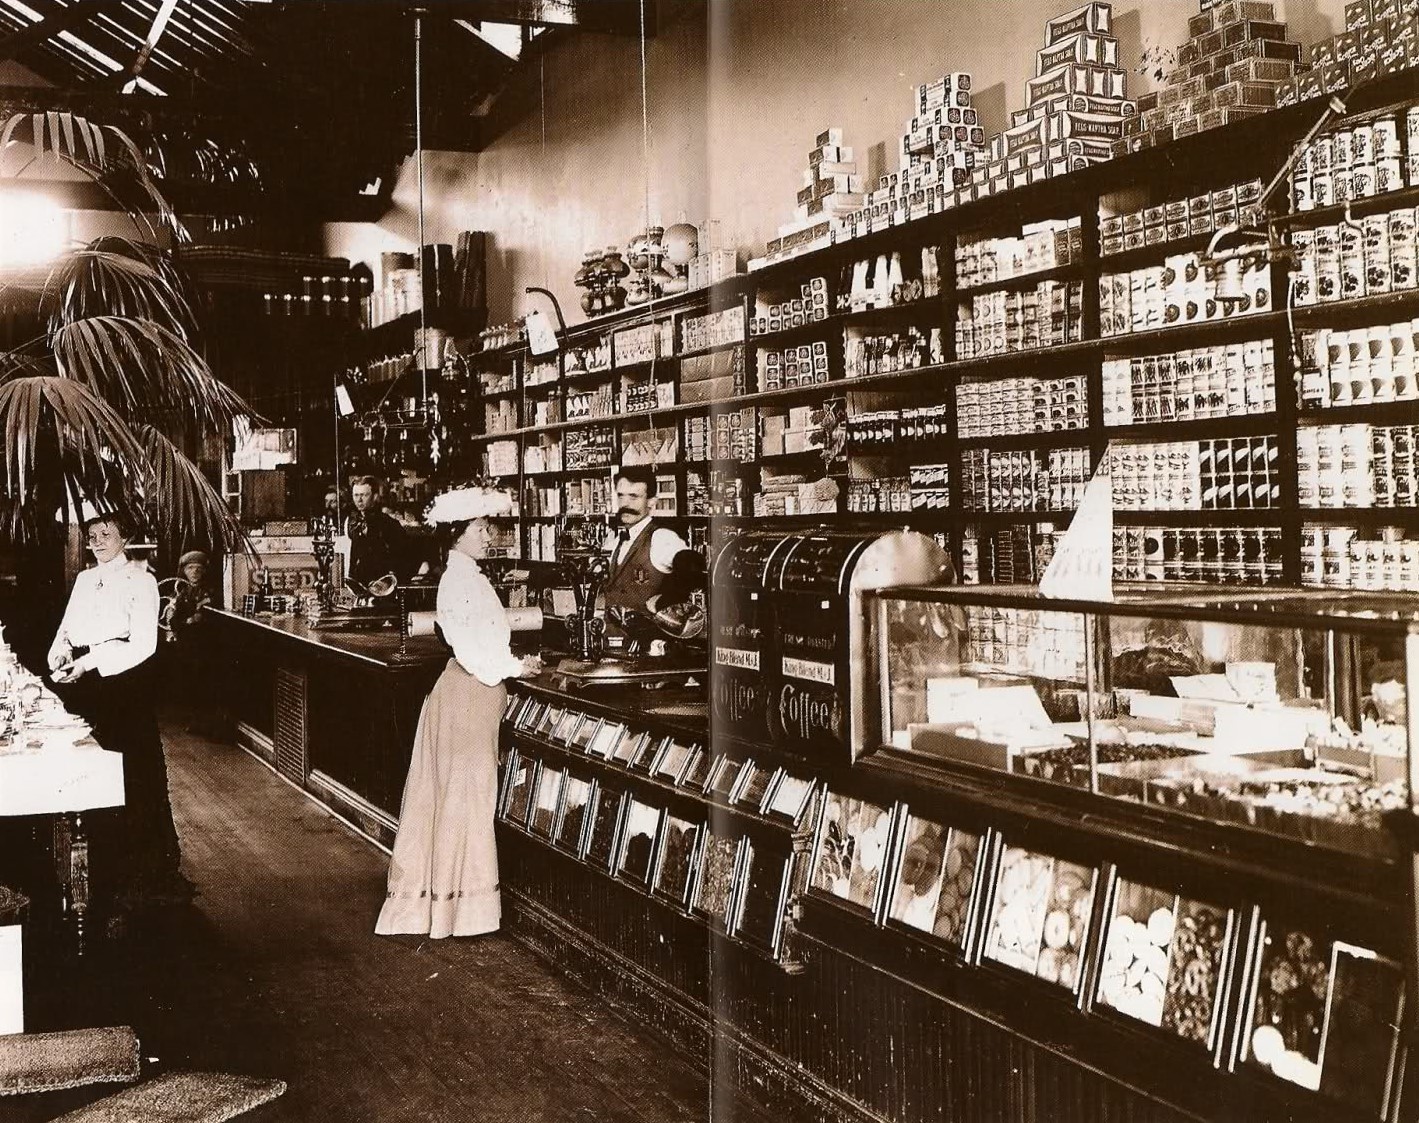 A grocery store in the late 1800s